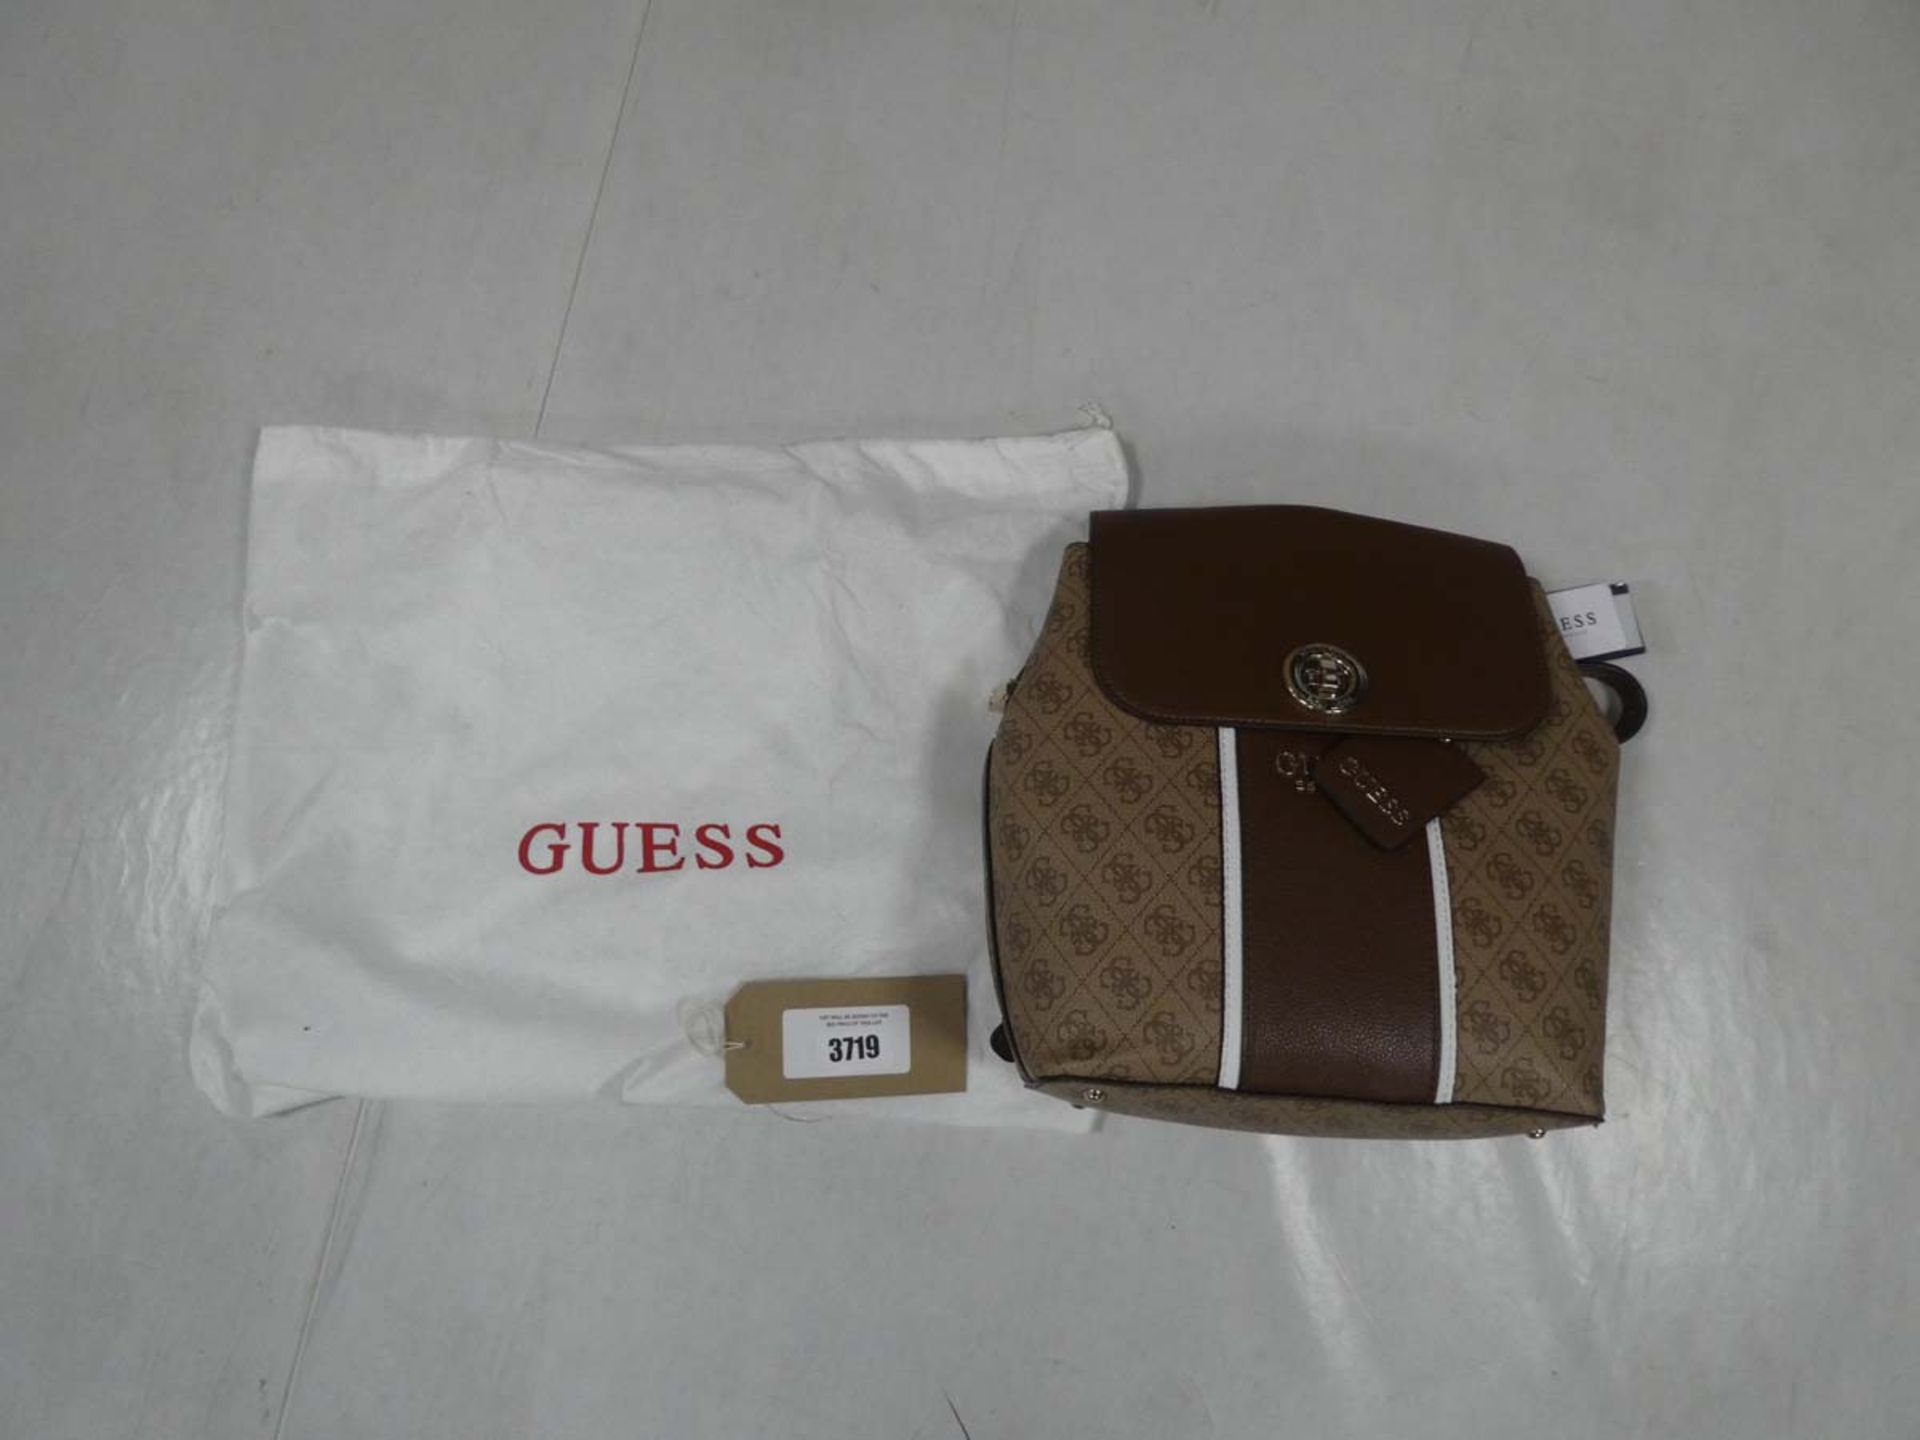 Guess Cathleen backpack, brown with dustbag